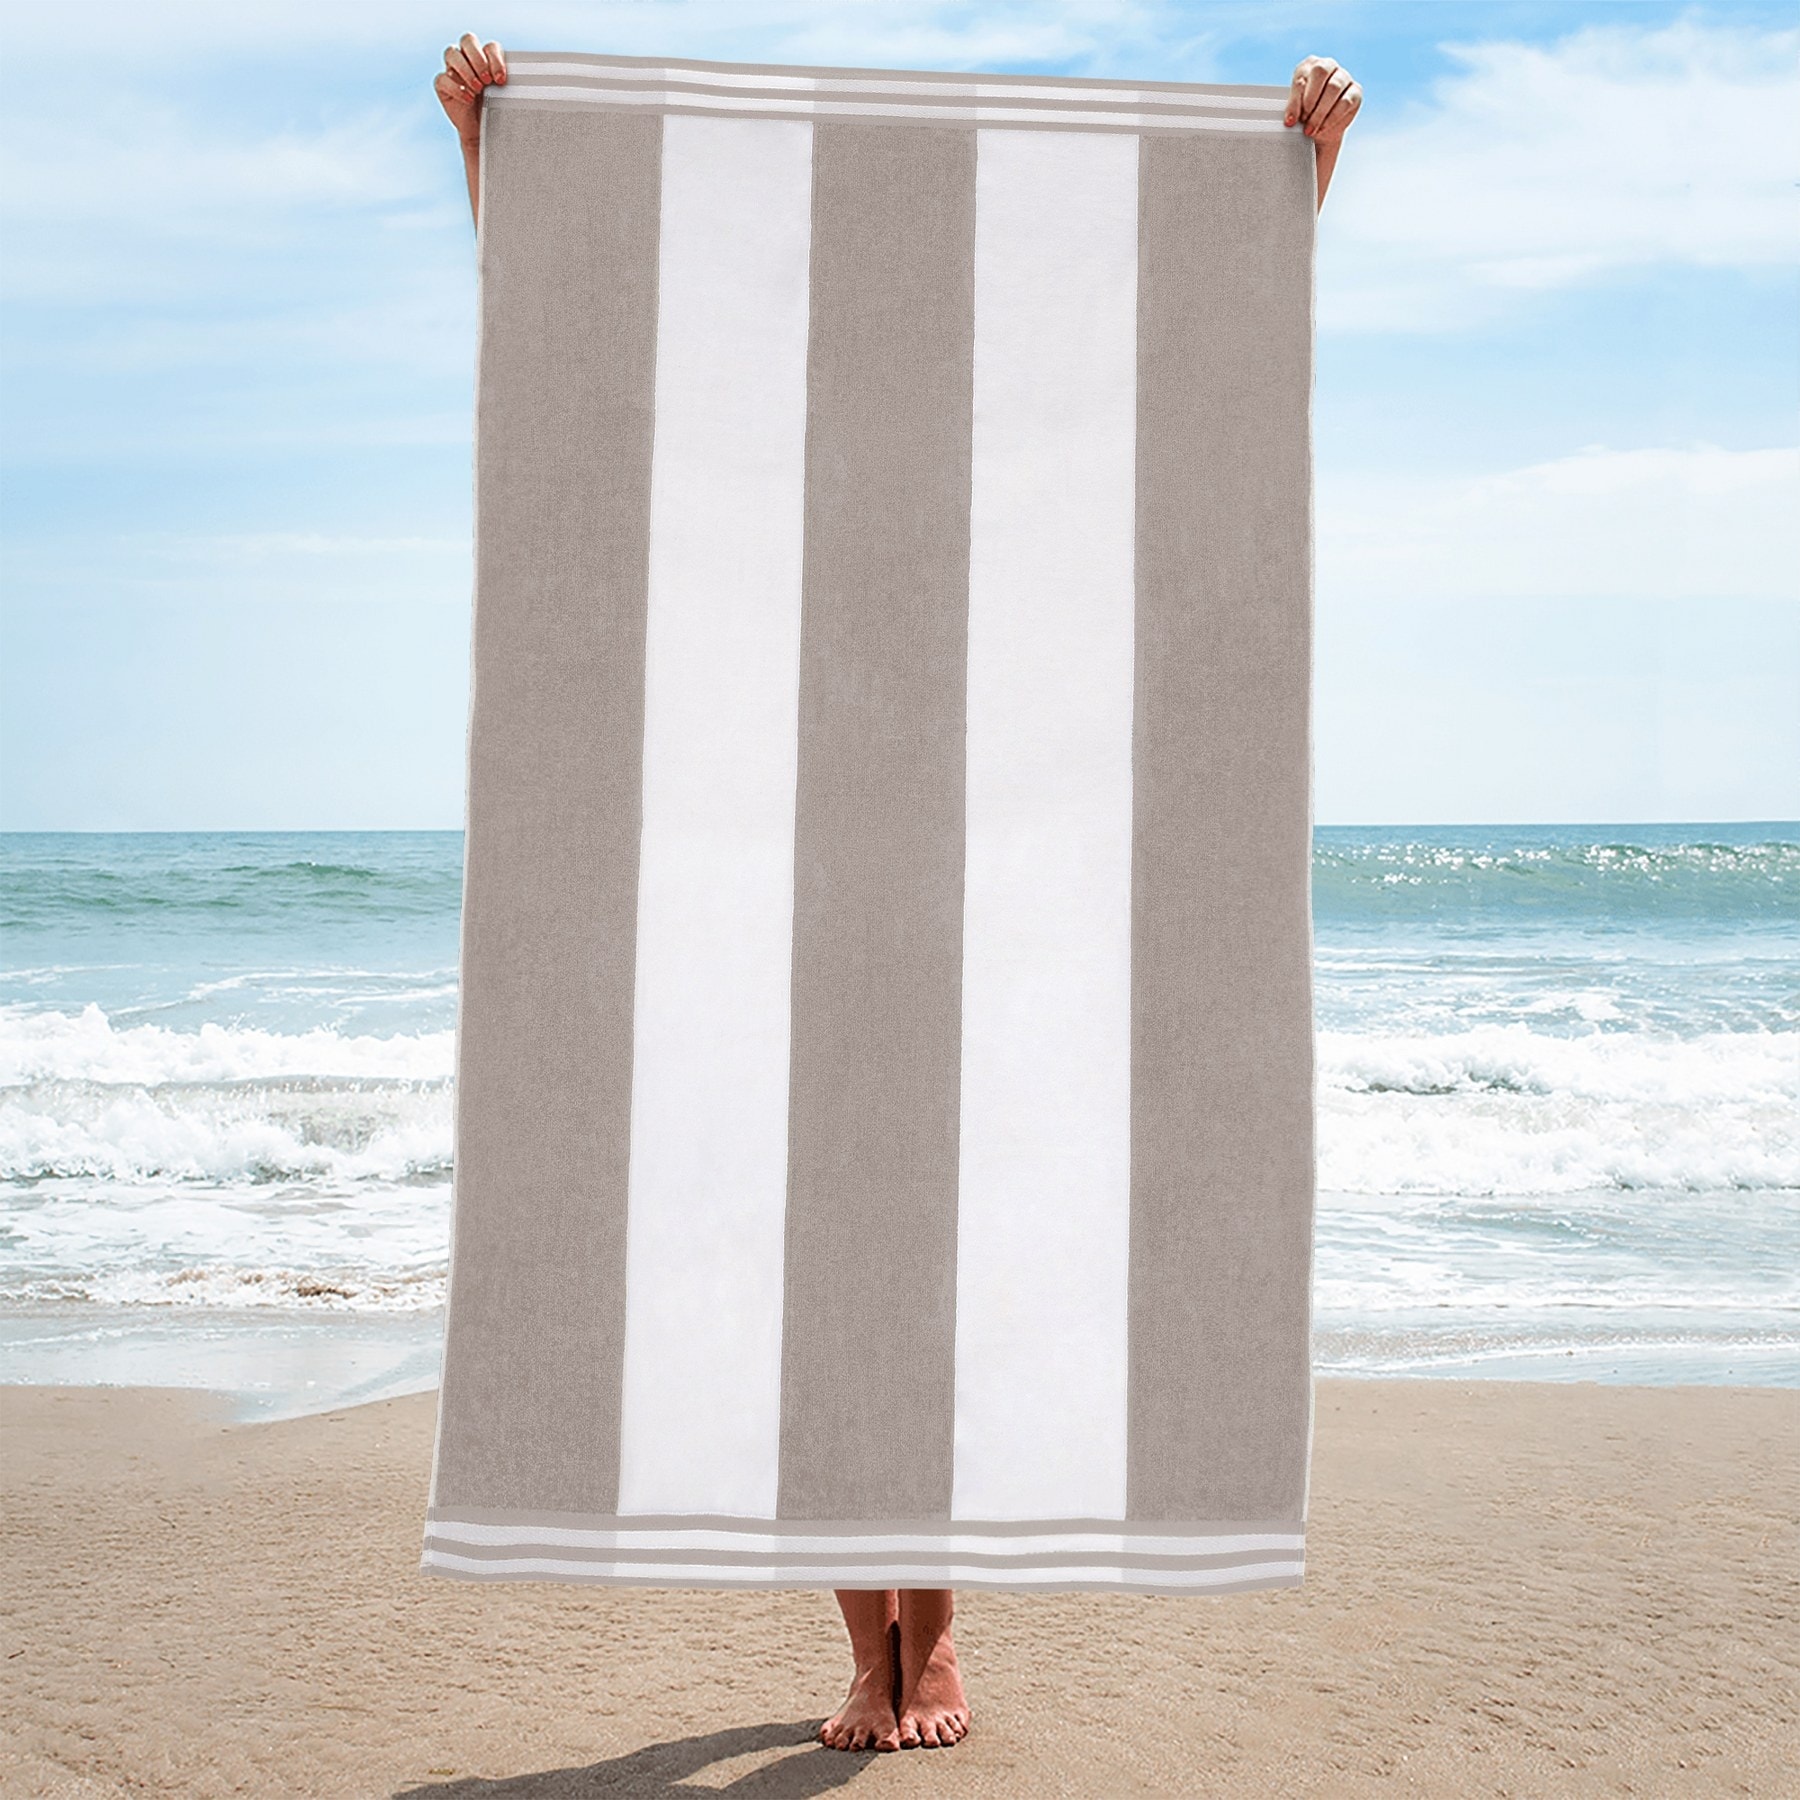 https://ak1.ostkcdn.com/images/products/is/images/direct/ecb6e609591b053fe12ea34ac5b994810a5022b1/Cabana-Stripe-Oversized-Cotton-Beach-Towel-by-Superior.jpg